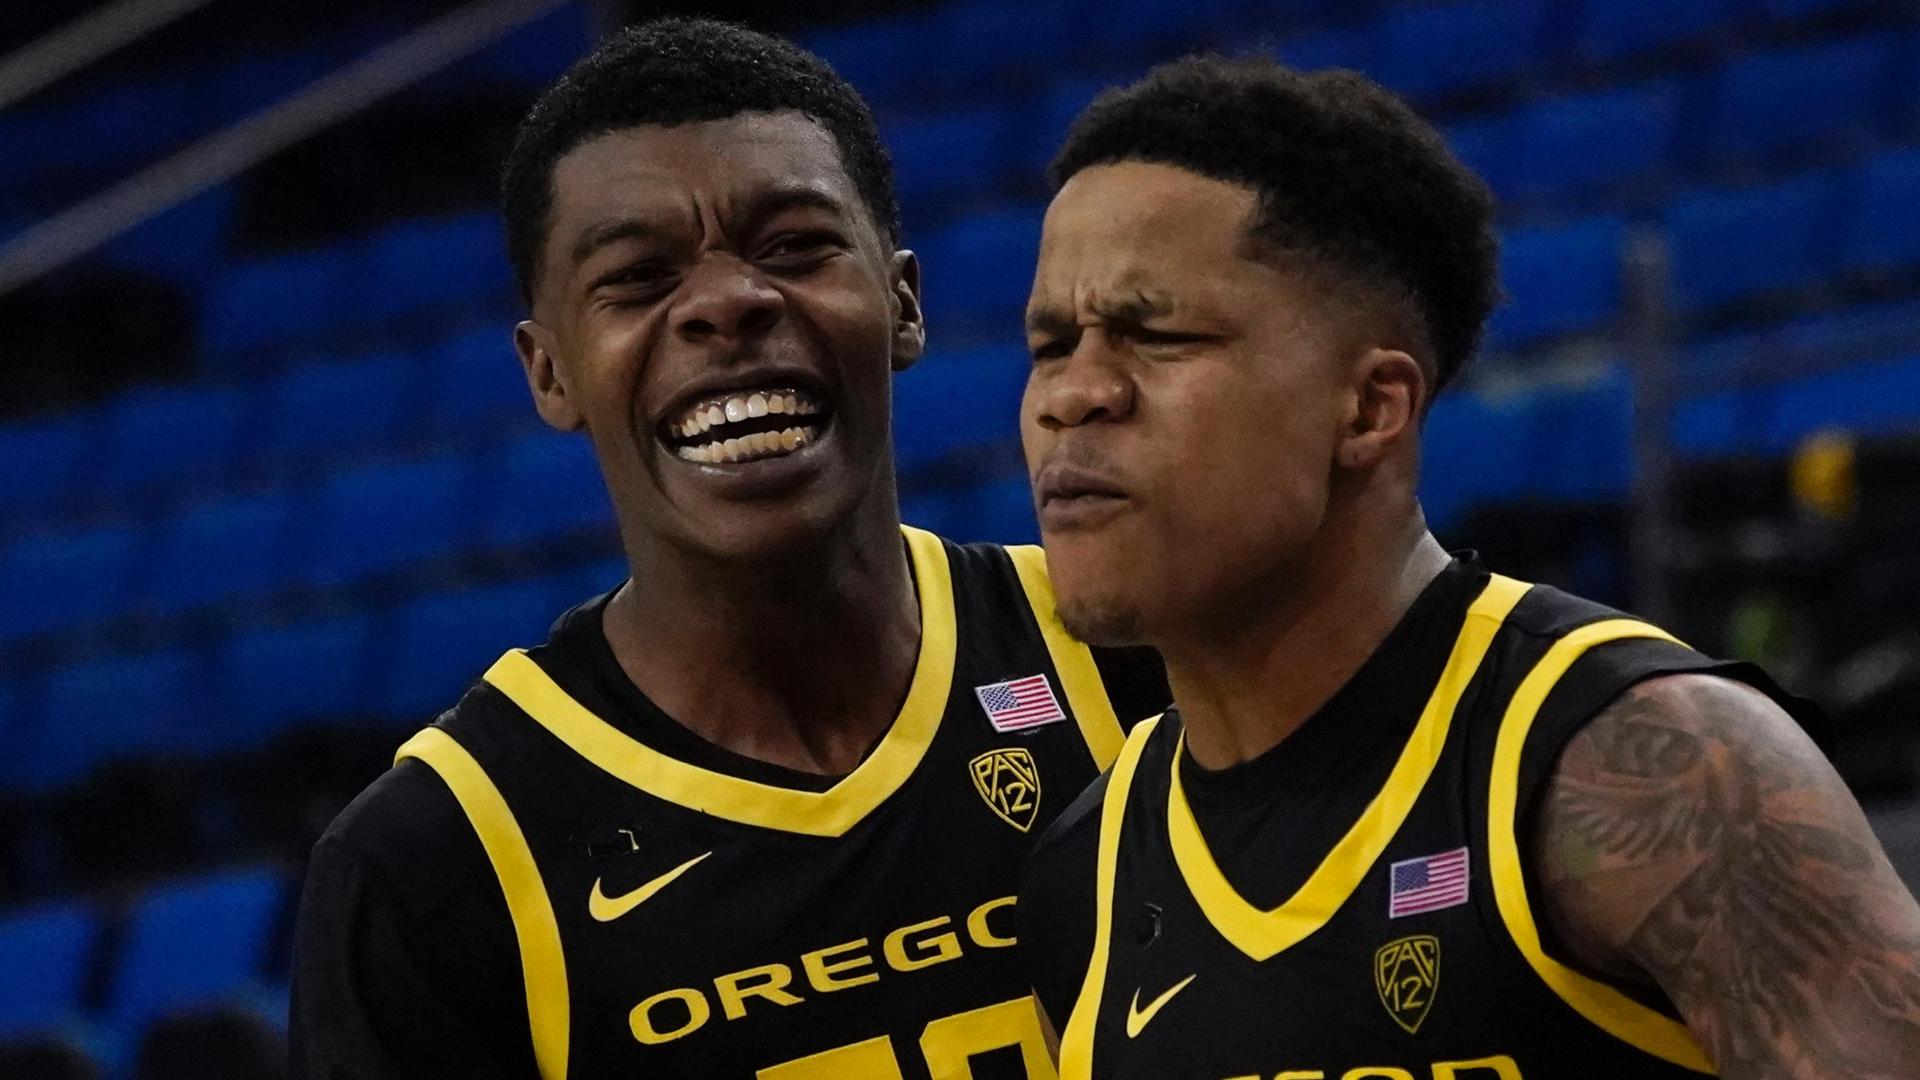 Jacob Young drains go-ahead bucket for Oregon late in OT